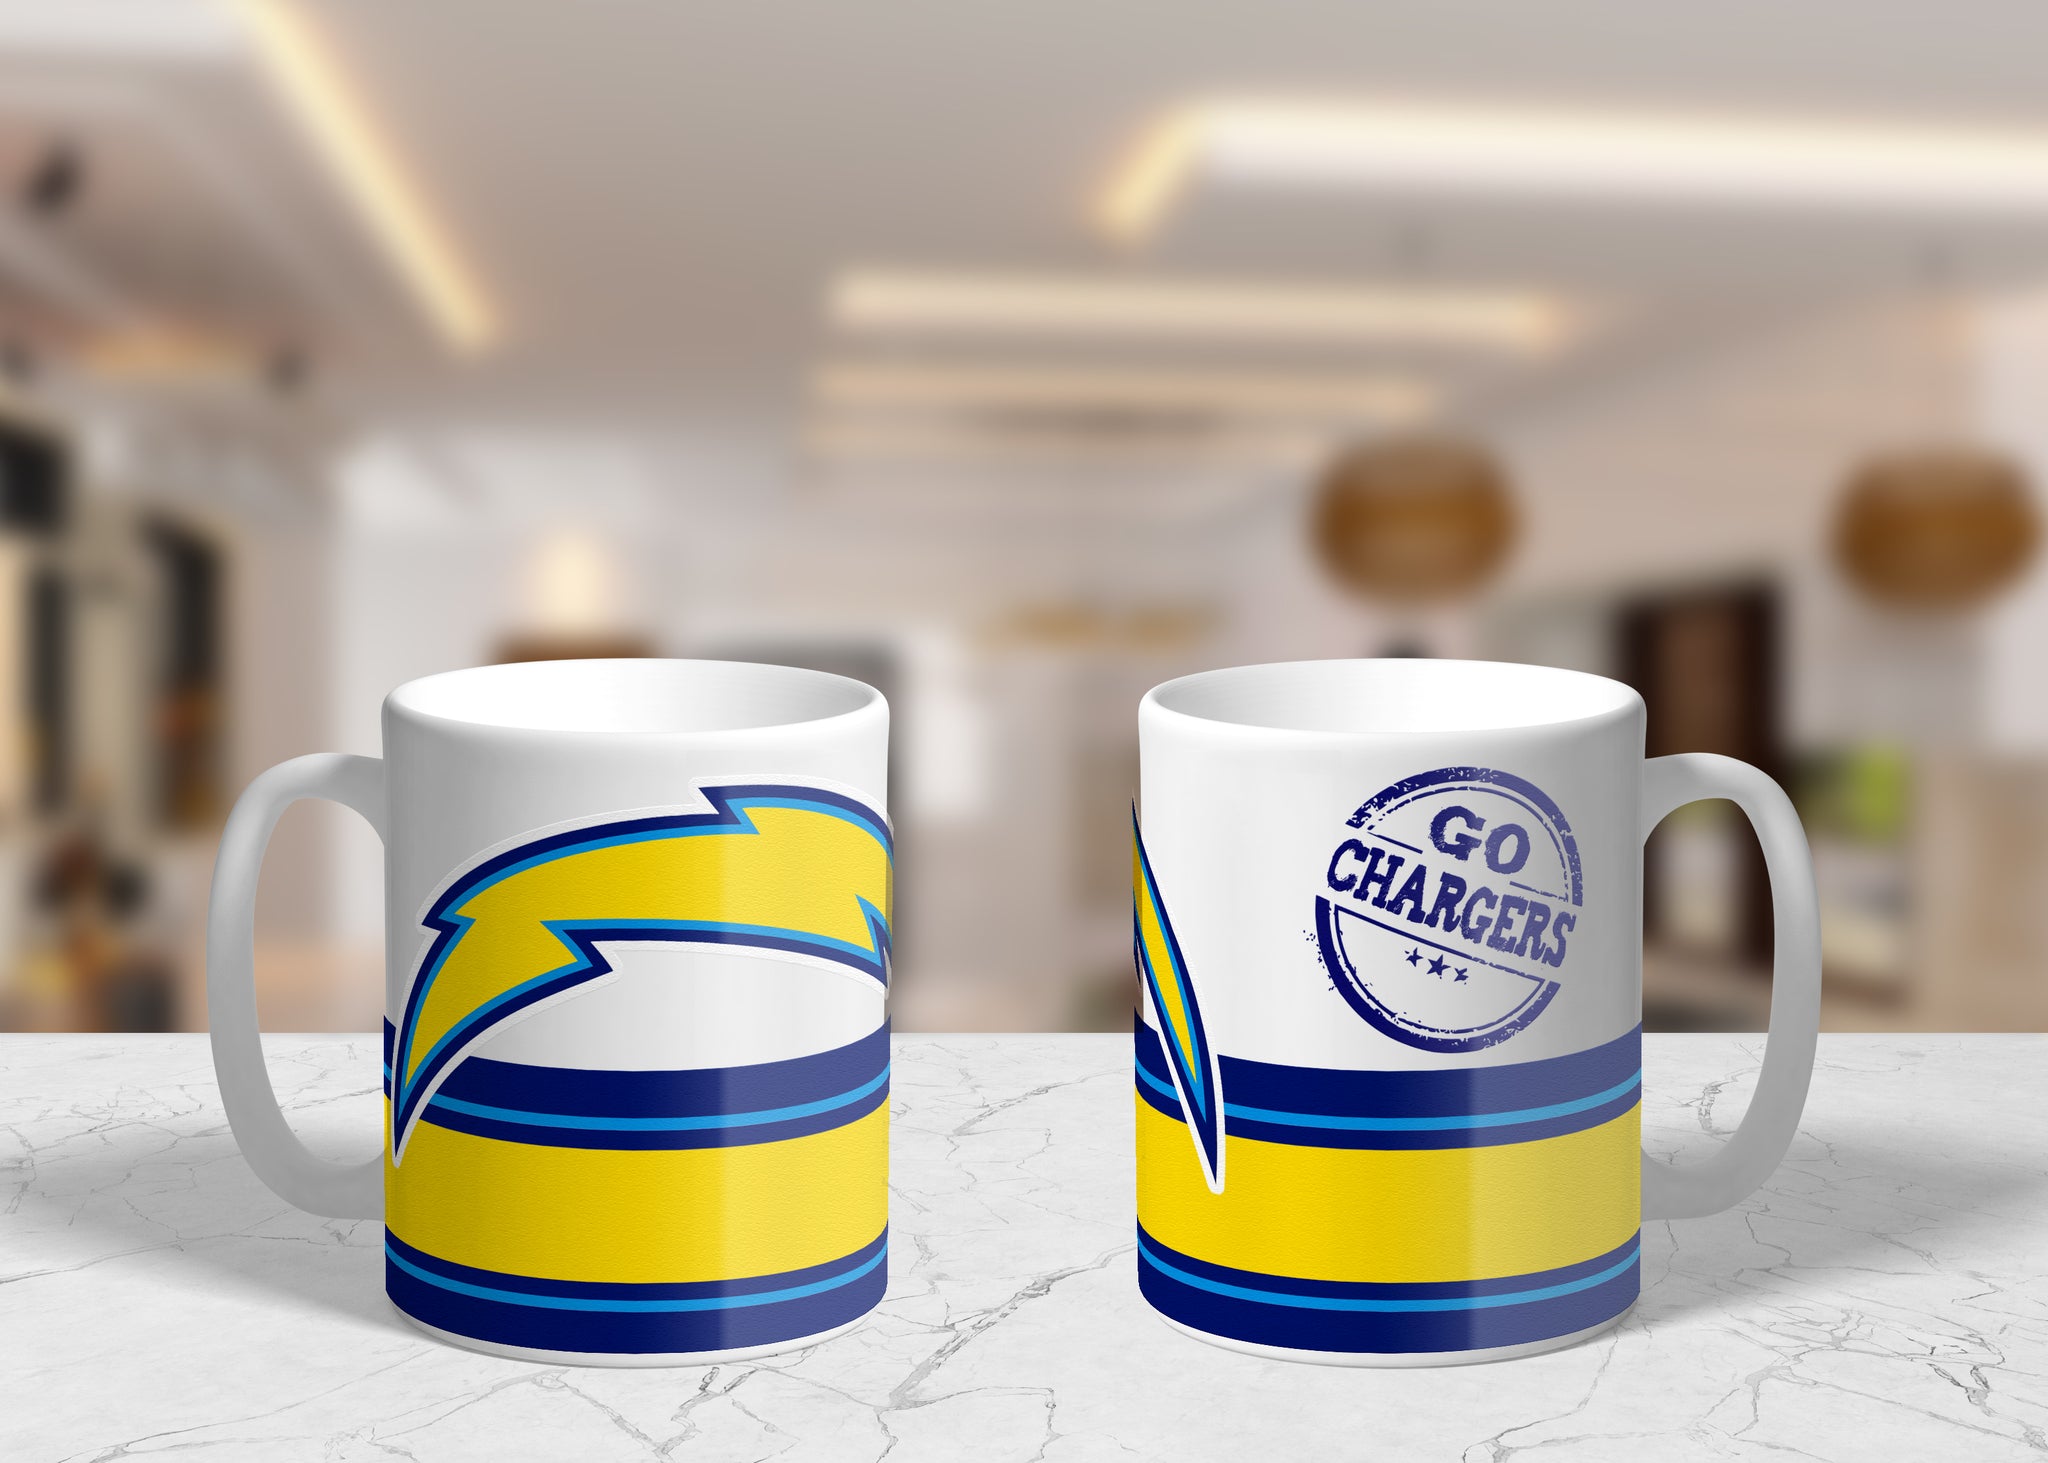 Nfl Los Angeles Chargers 15oz Jump Mug With Silicone Grip : Target